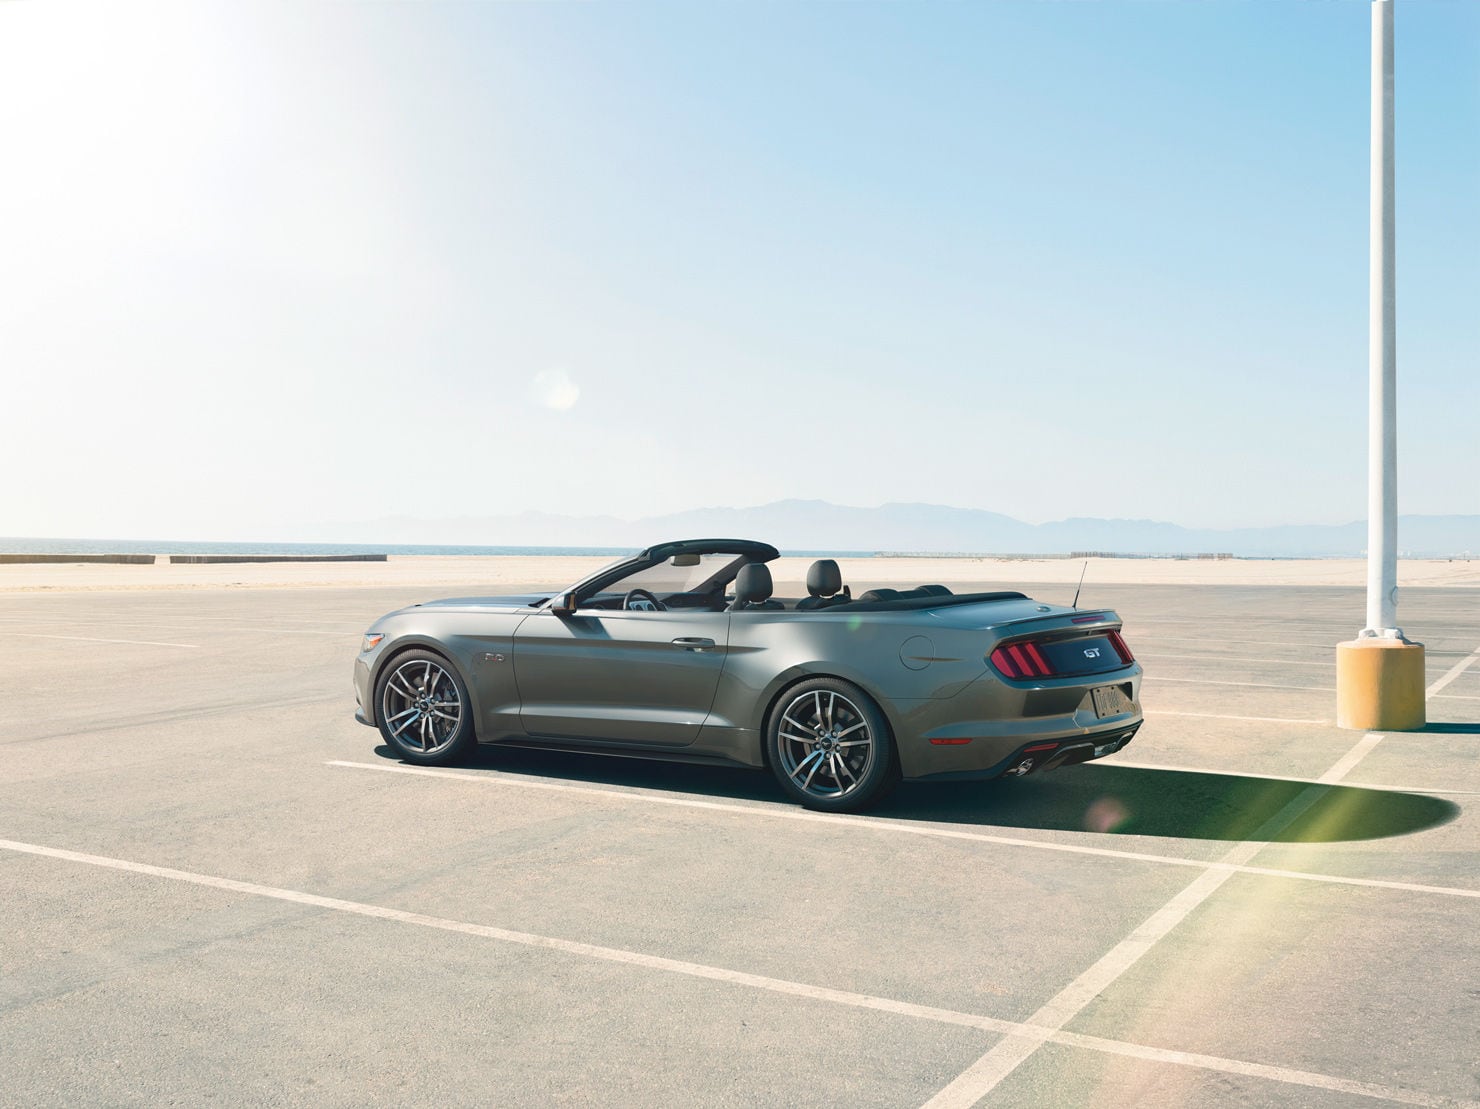 s550_feature_1480x700_convertible-top-down.jpg